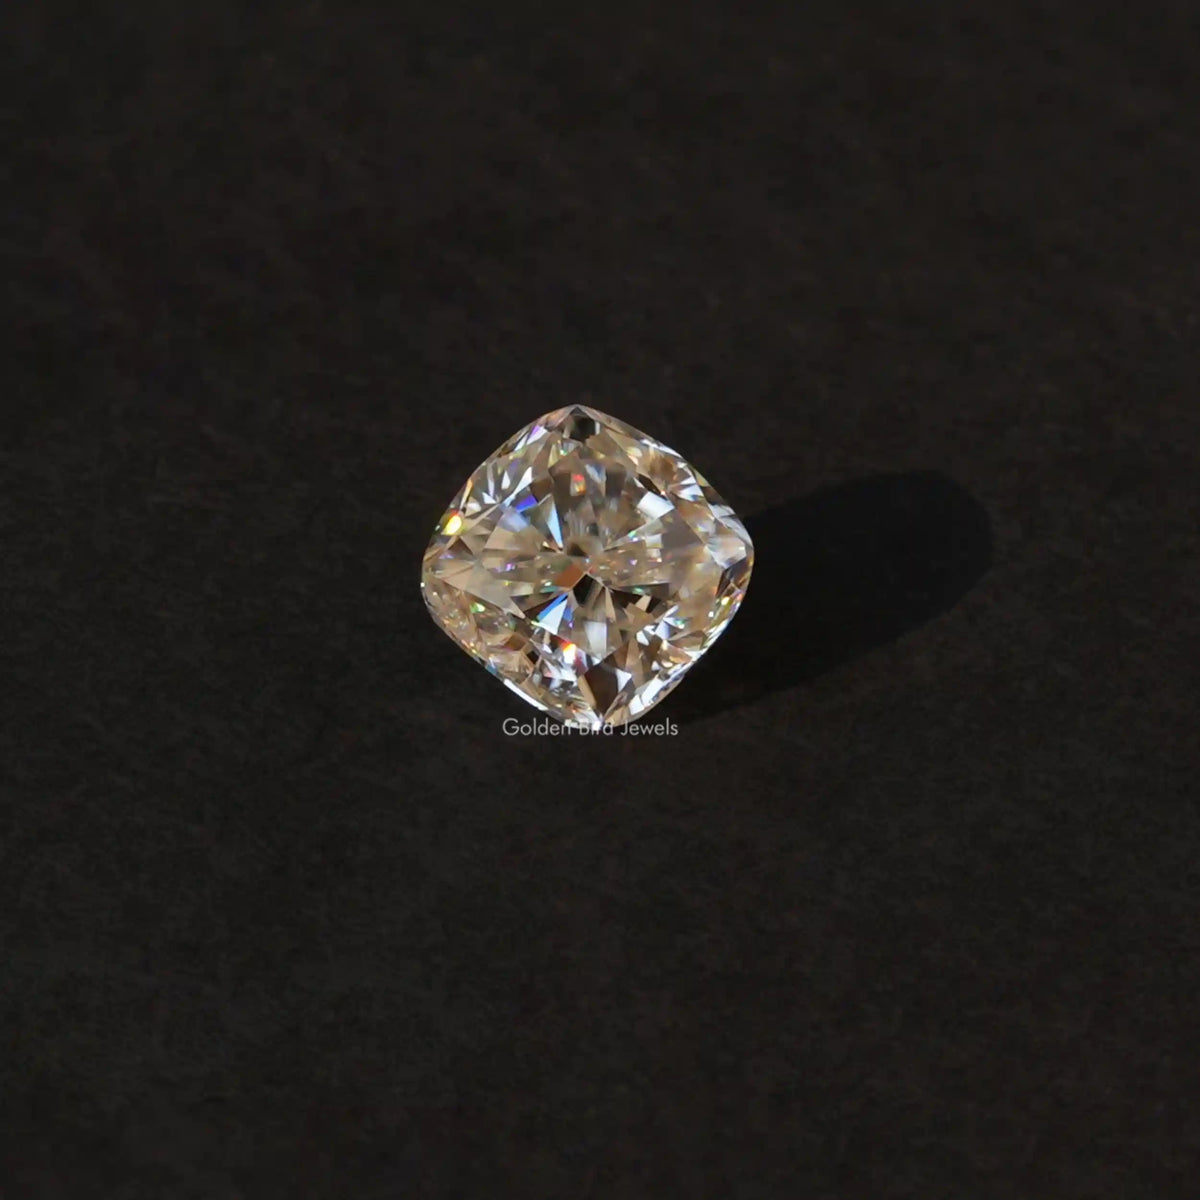 [Front view of cushion cut loose moissanite stone]-[Golden Bird Jewels]